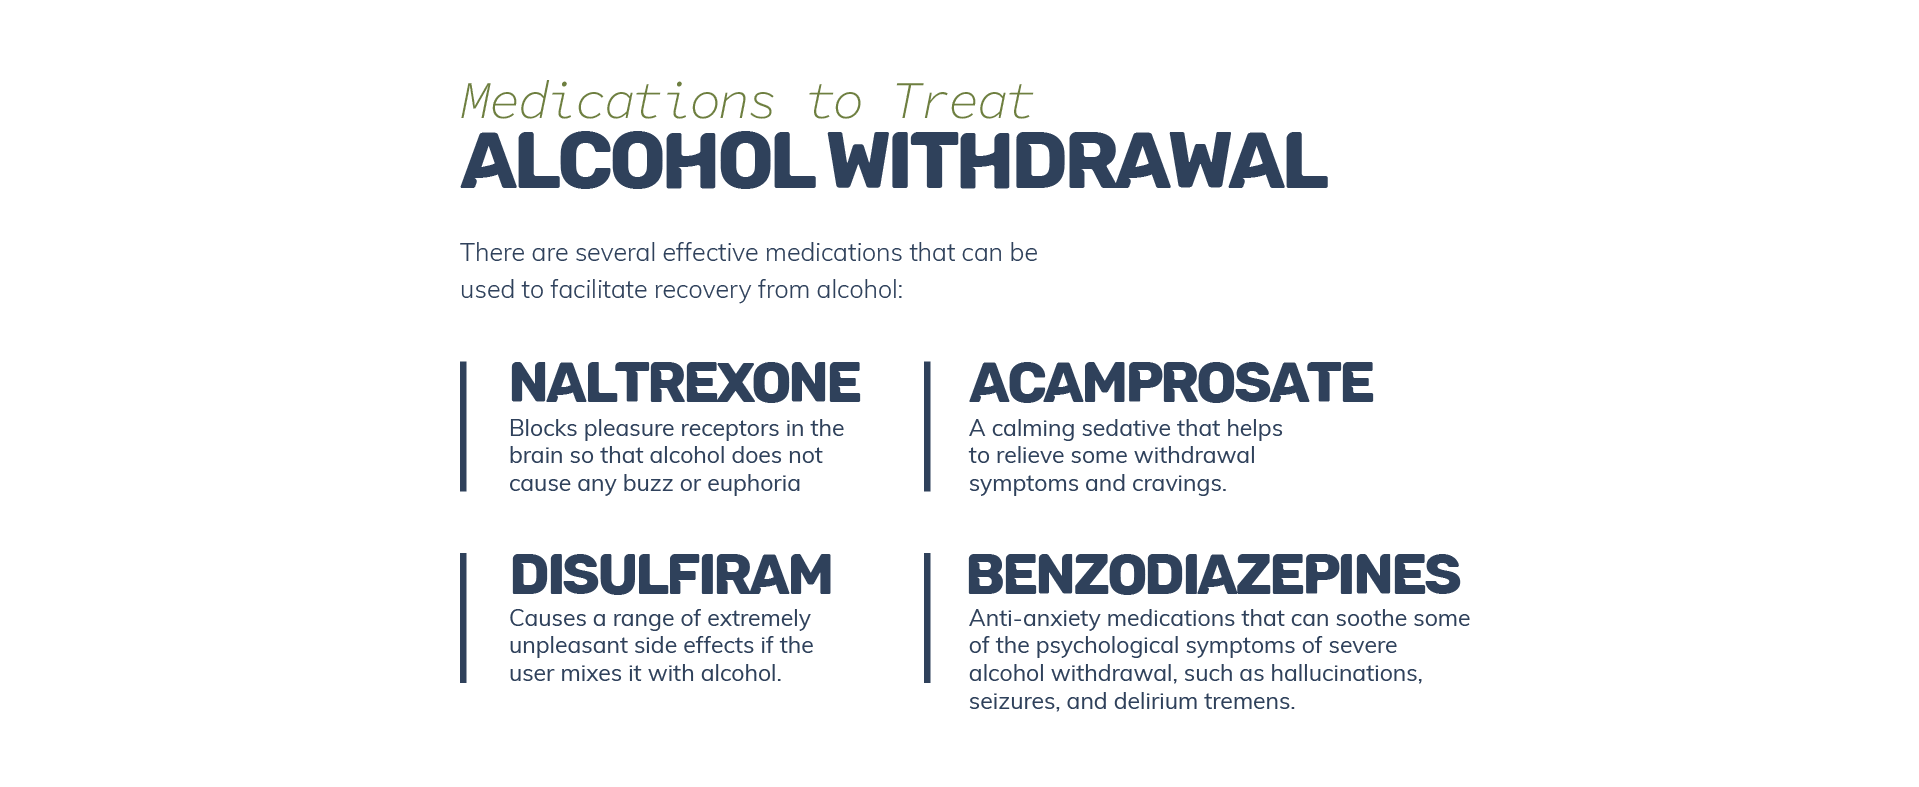 Treating Alcohol Withdrawal